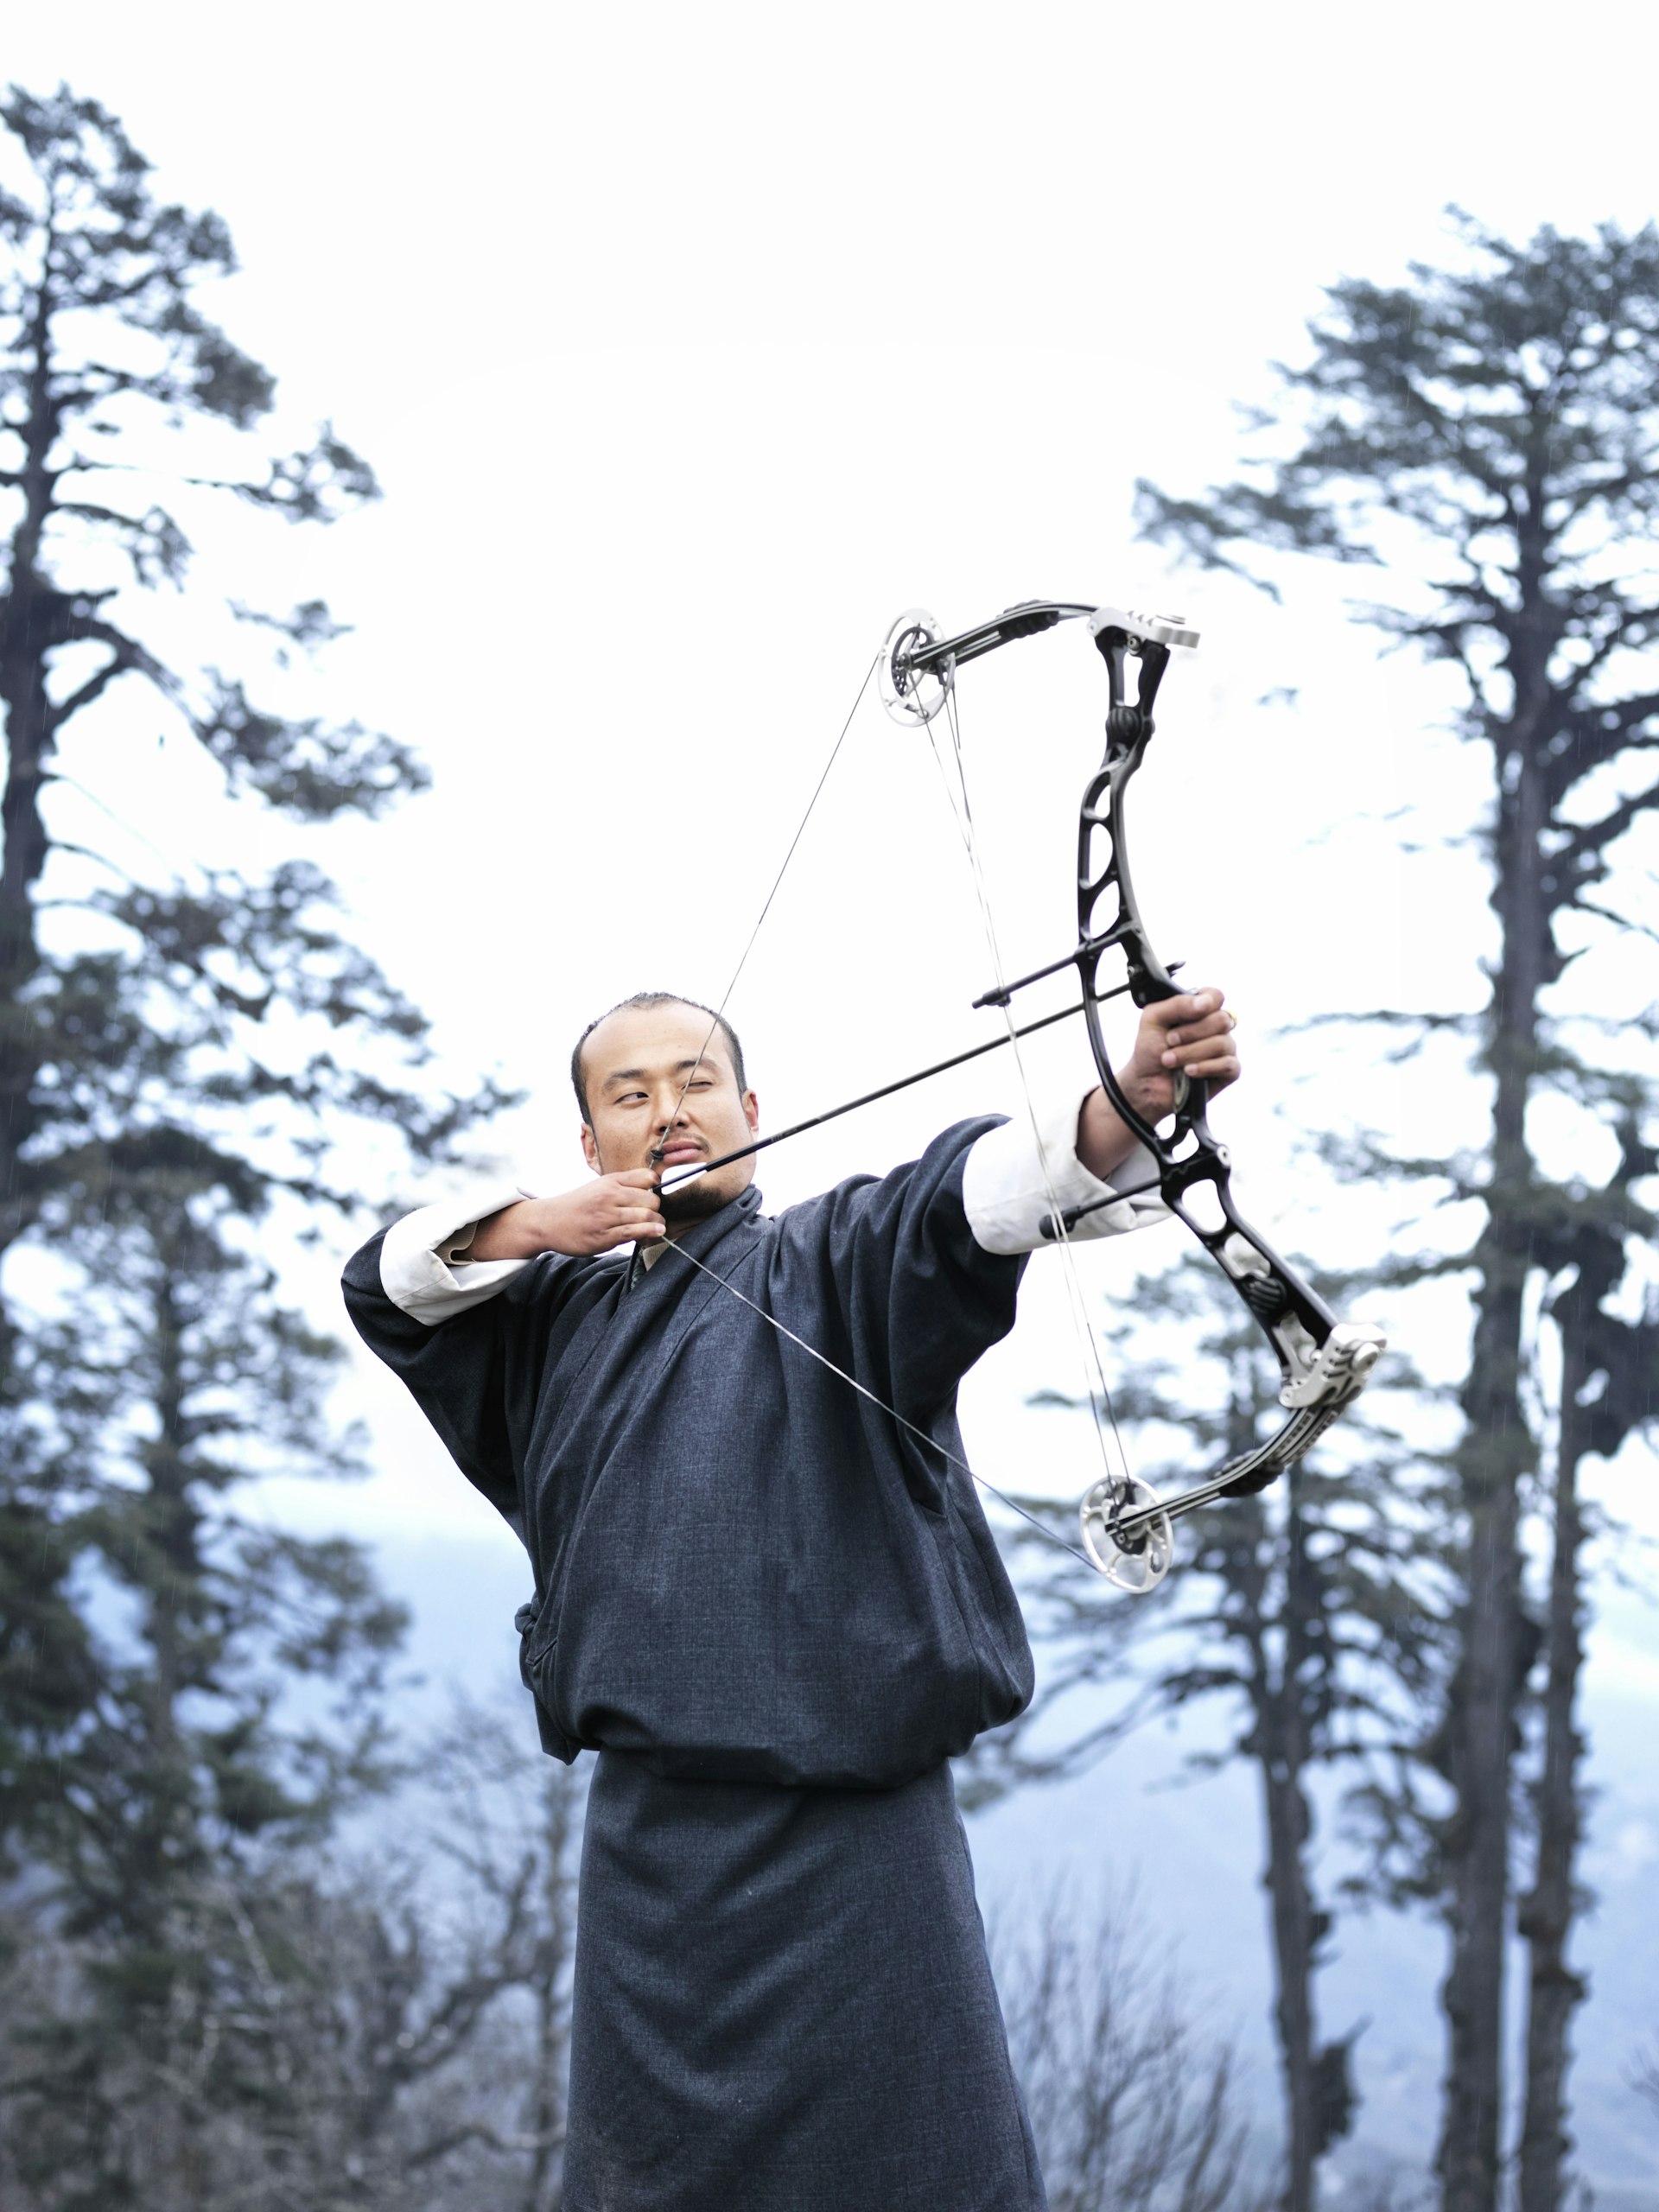 A man dressed in black stretches back his bow and aims an arrow into the distance